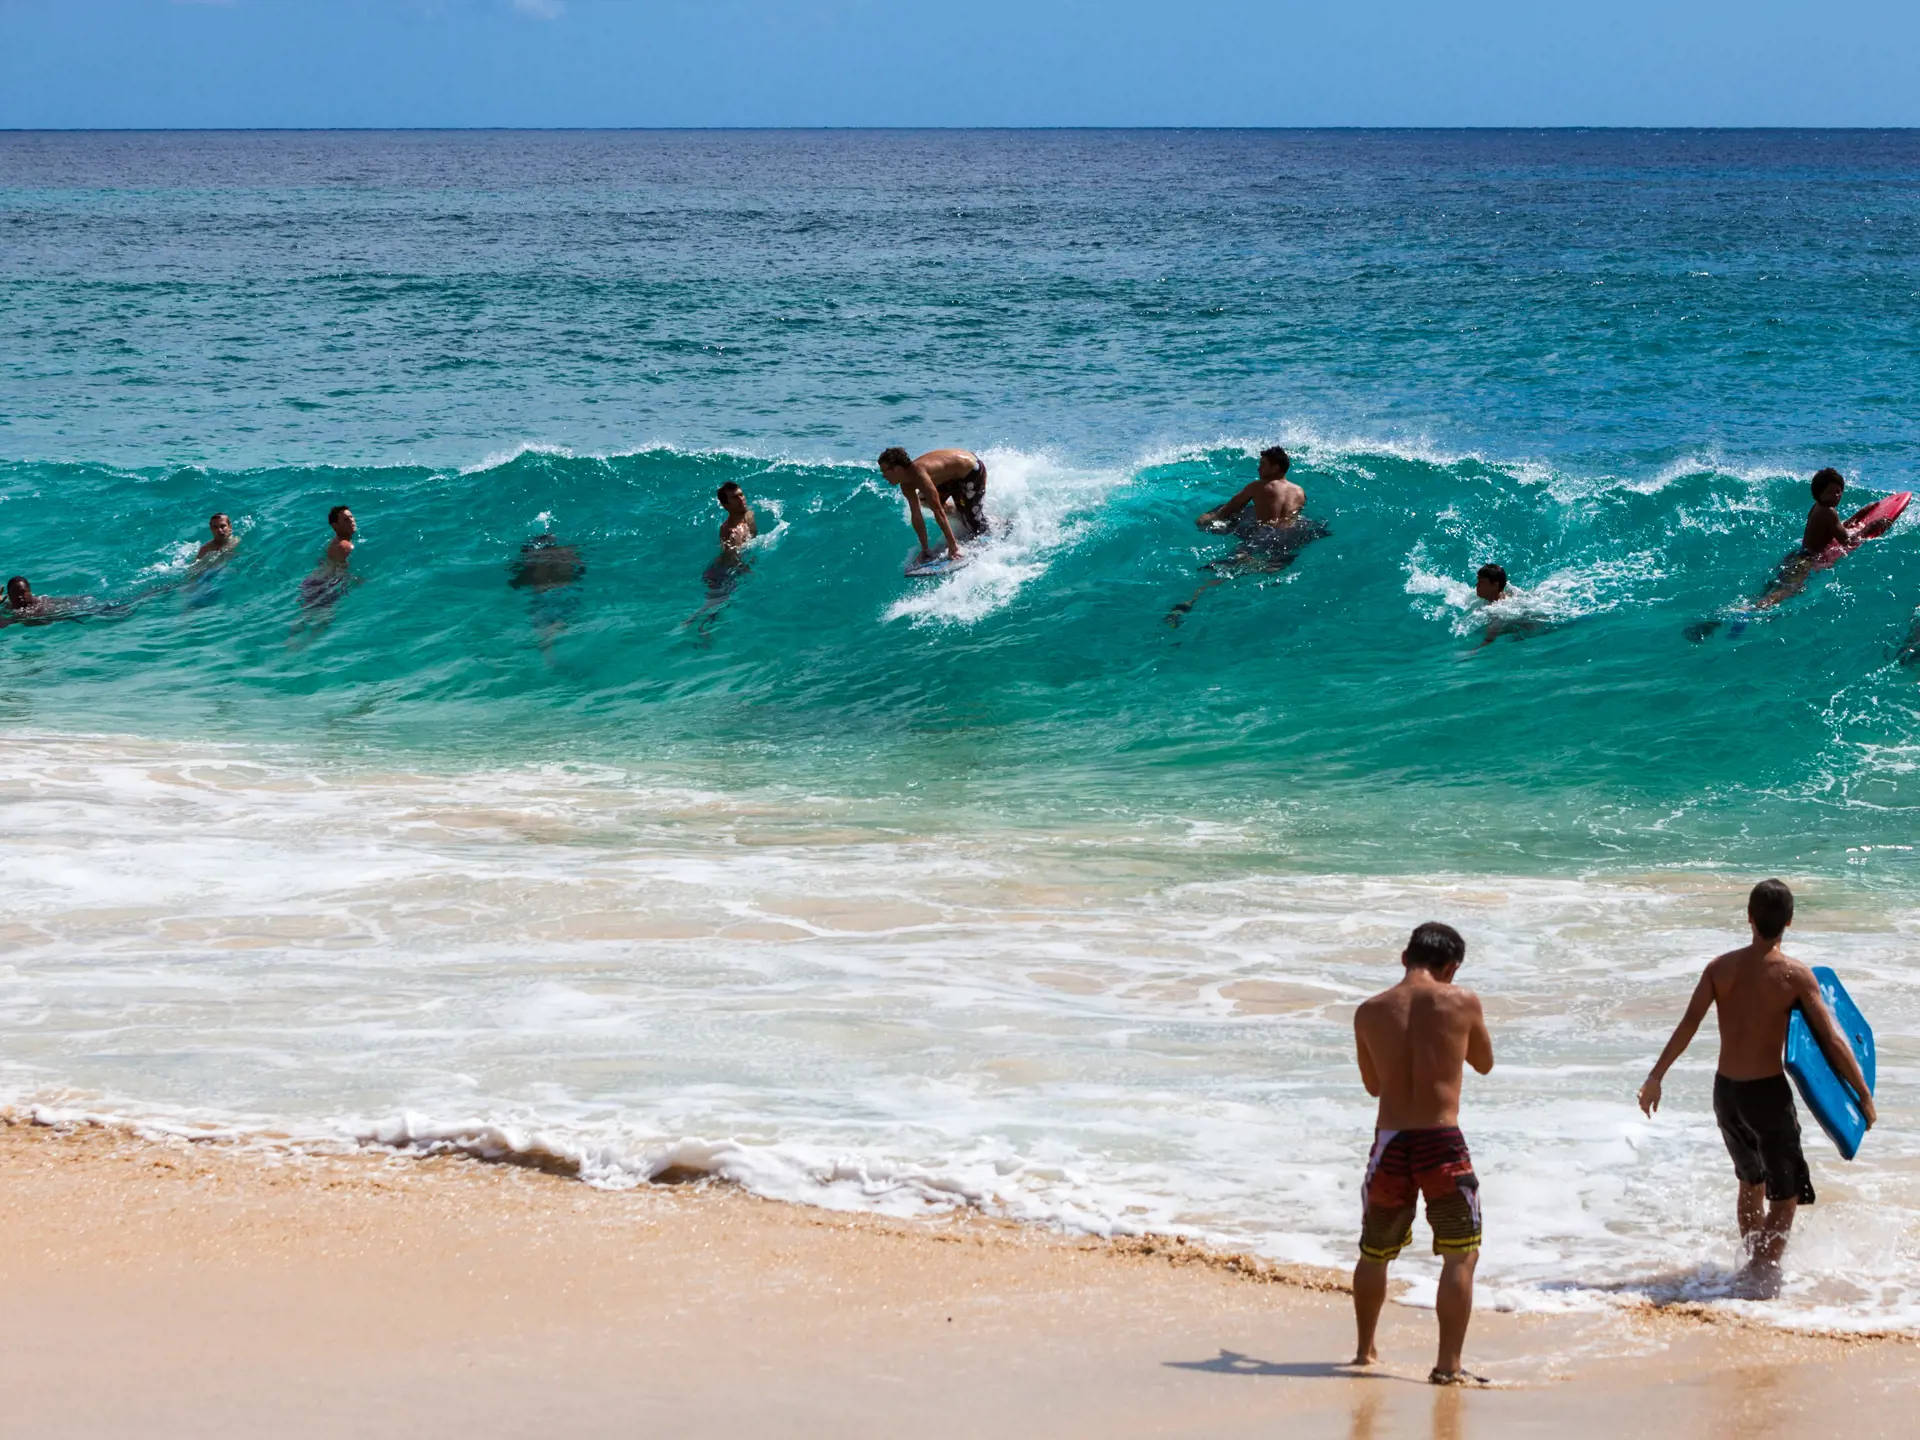 Unidentified surfers and body surfers at Sandy Beach on Oahu Island, Hawaii, USA, circa October 2013 - Billede.jpg